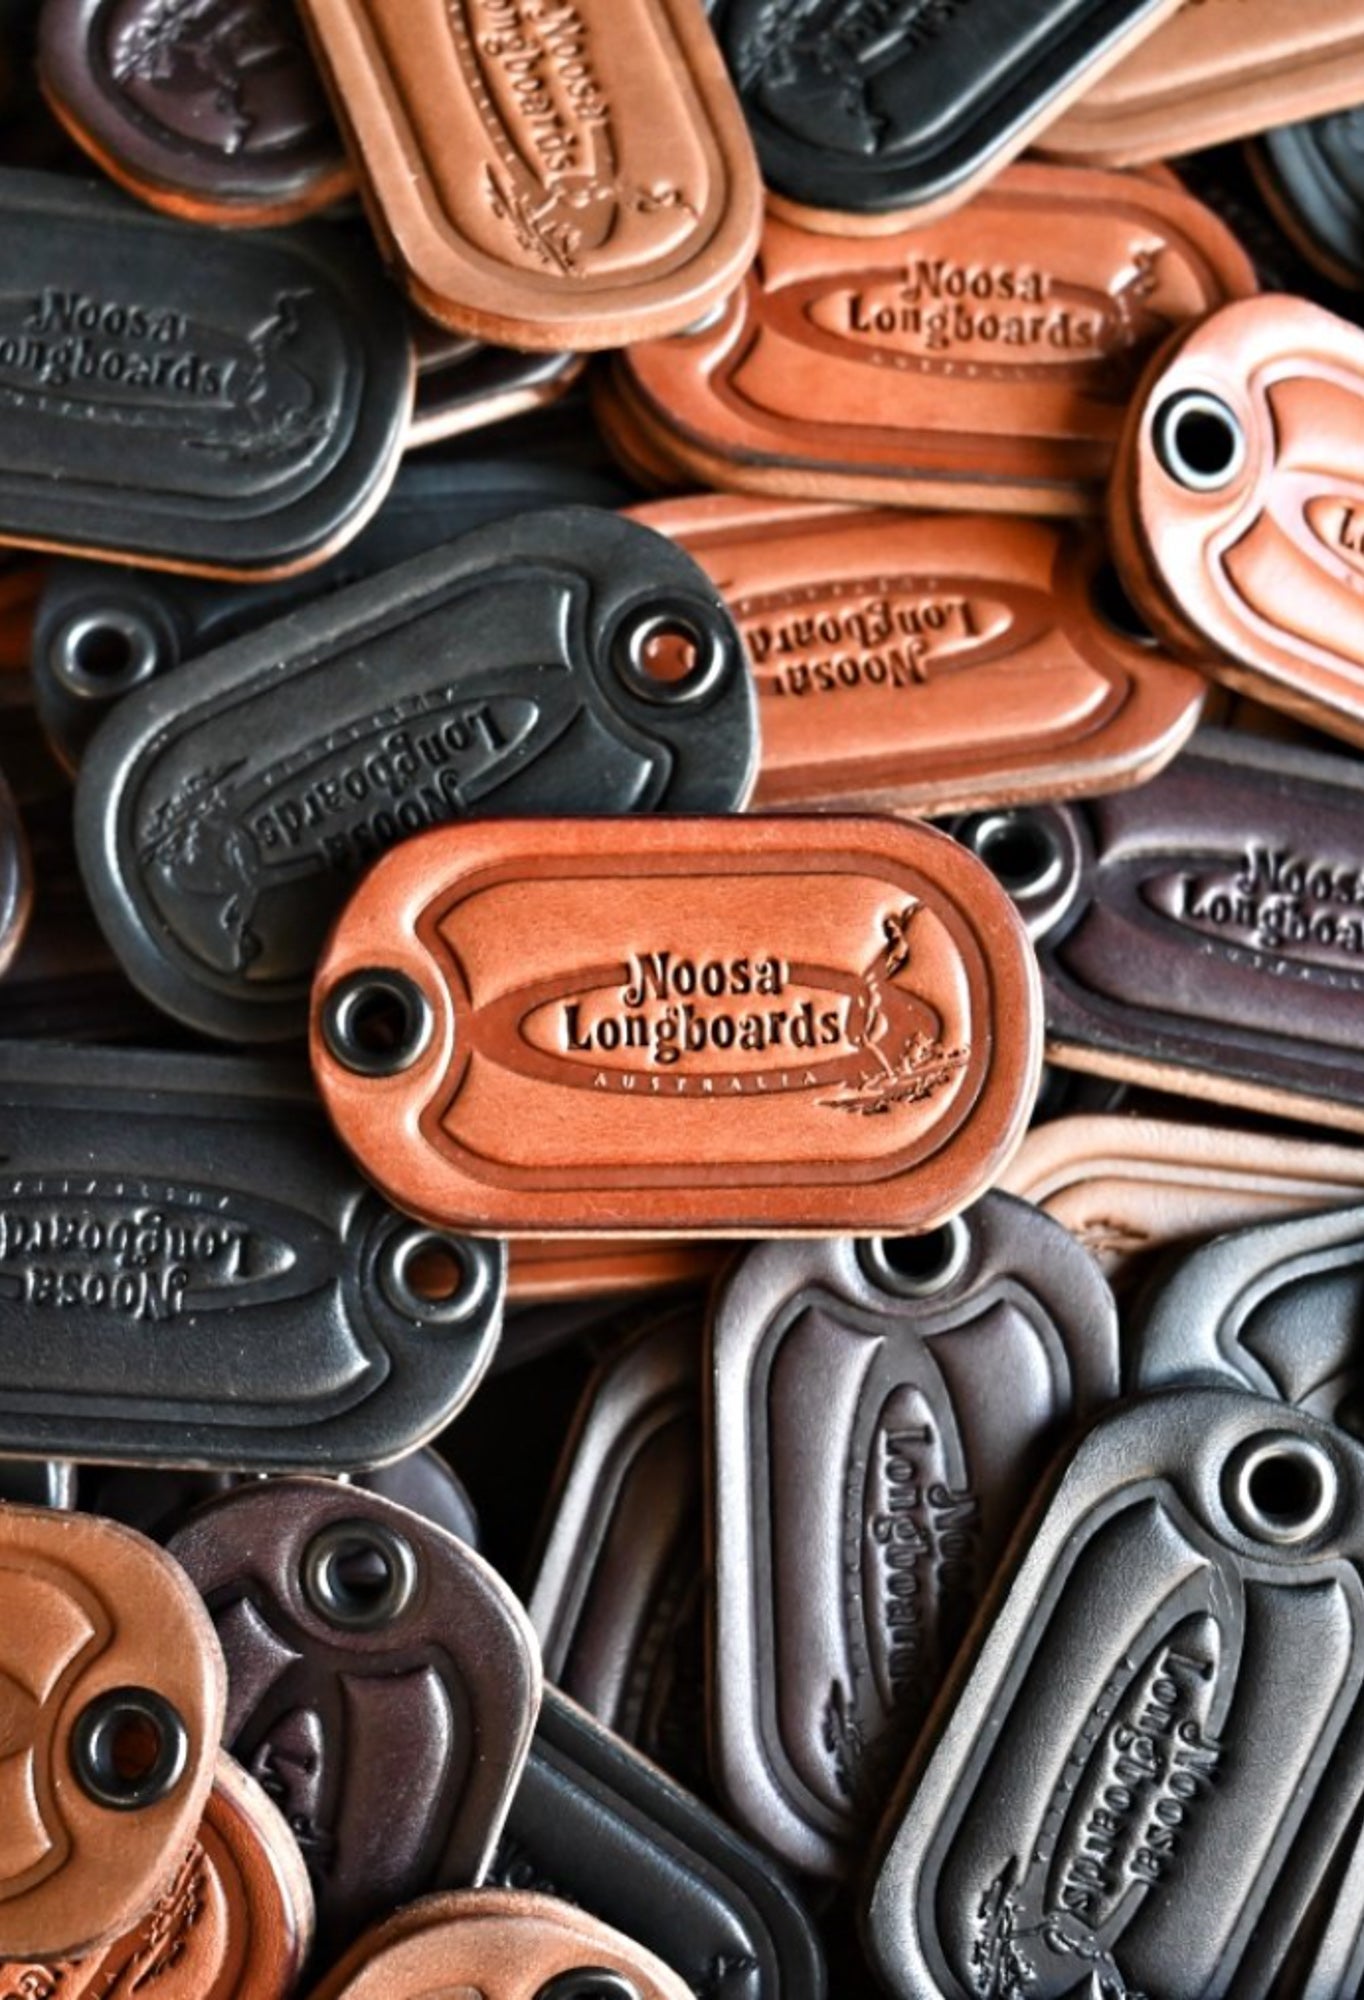 Noosa Longboards Leather Key Ring (Made in Noosa)